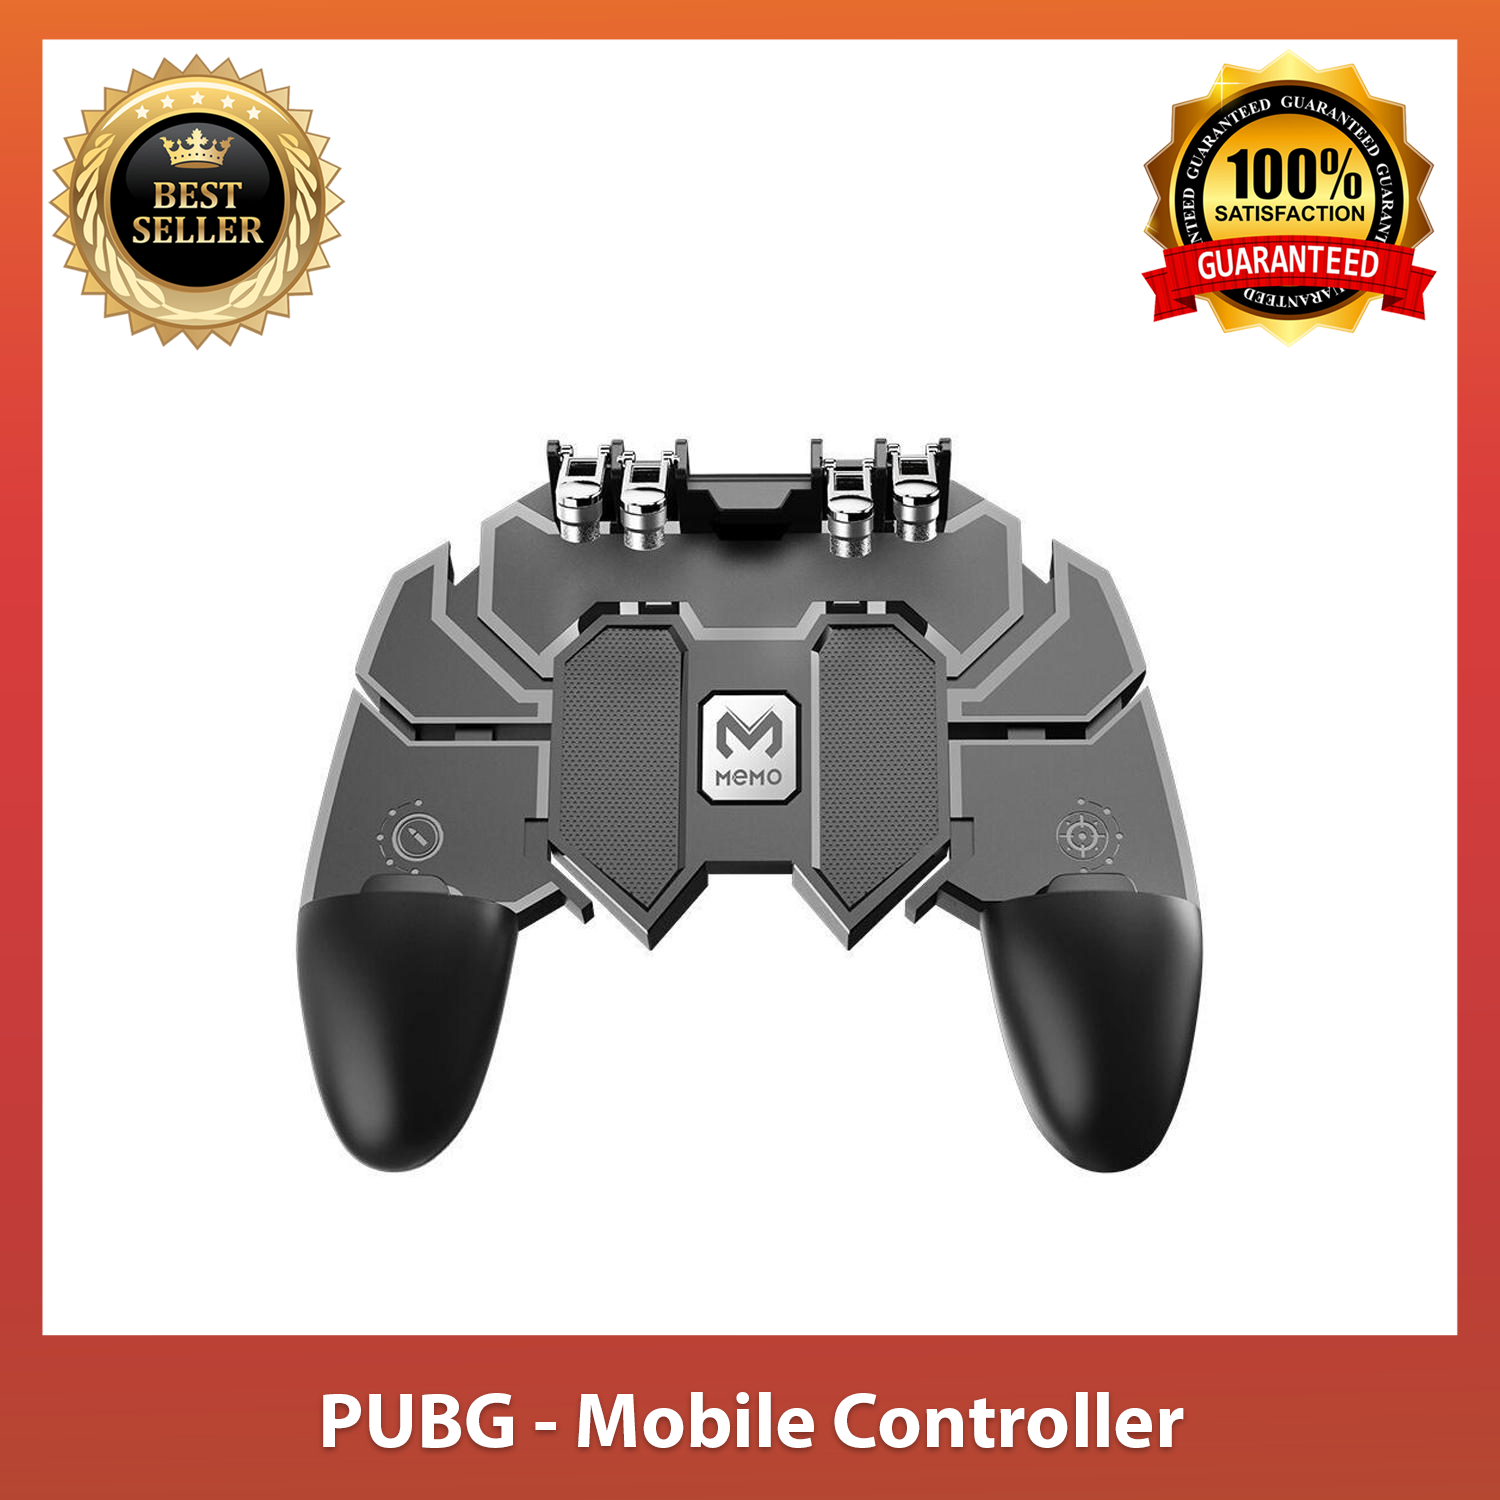 PUBG - Mobile Controller MEMO Six Finger All-In-One Mobile Gamepad AK66 for PUBG Free Fire Key Button Artifact Games Controller L1 R1 Joystick Trigger | Lazada